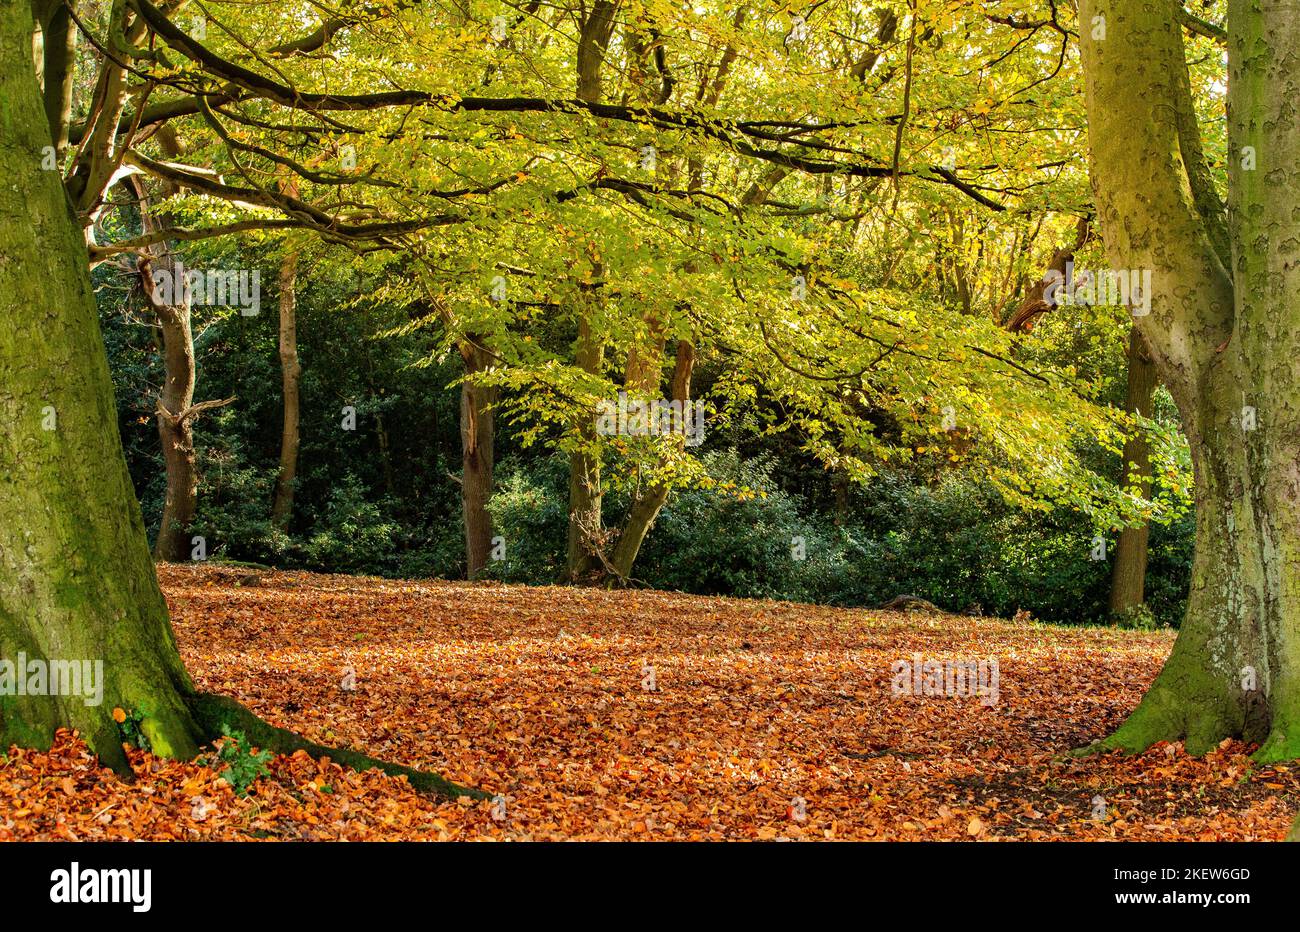 Mixed deciduous trees showing autumn (fall) colour (color) in Shipley Glen woods in Baildon, Yorkshire. Stock Photo